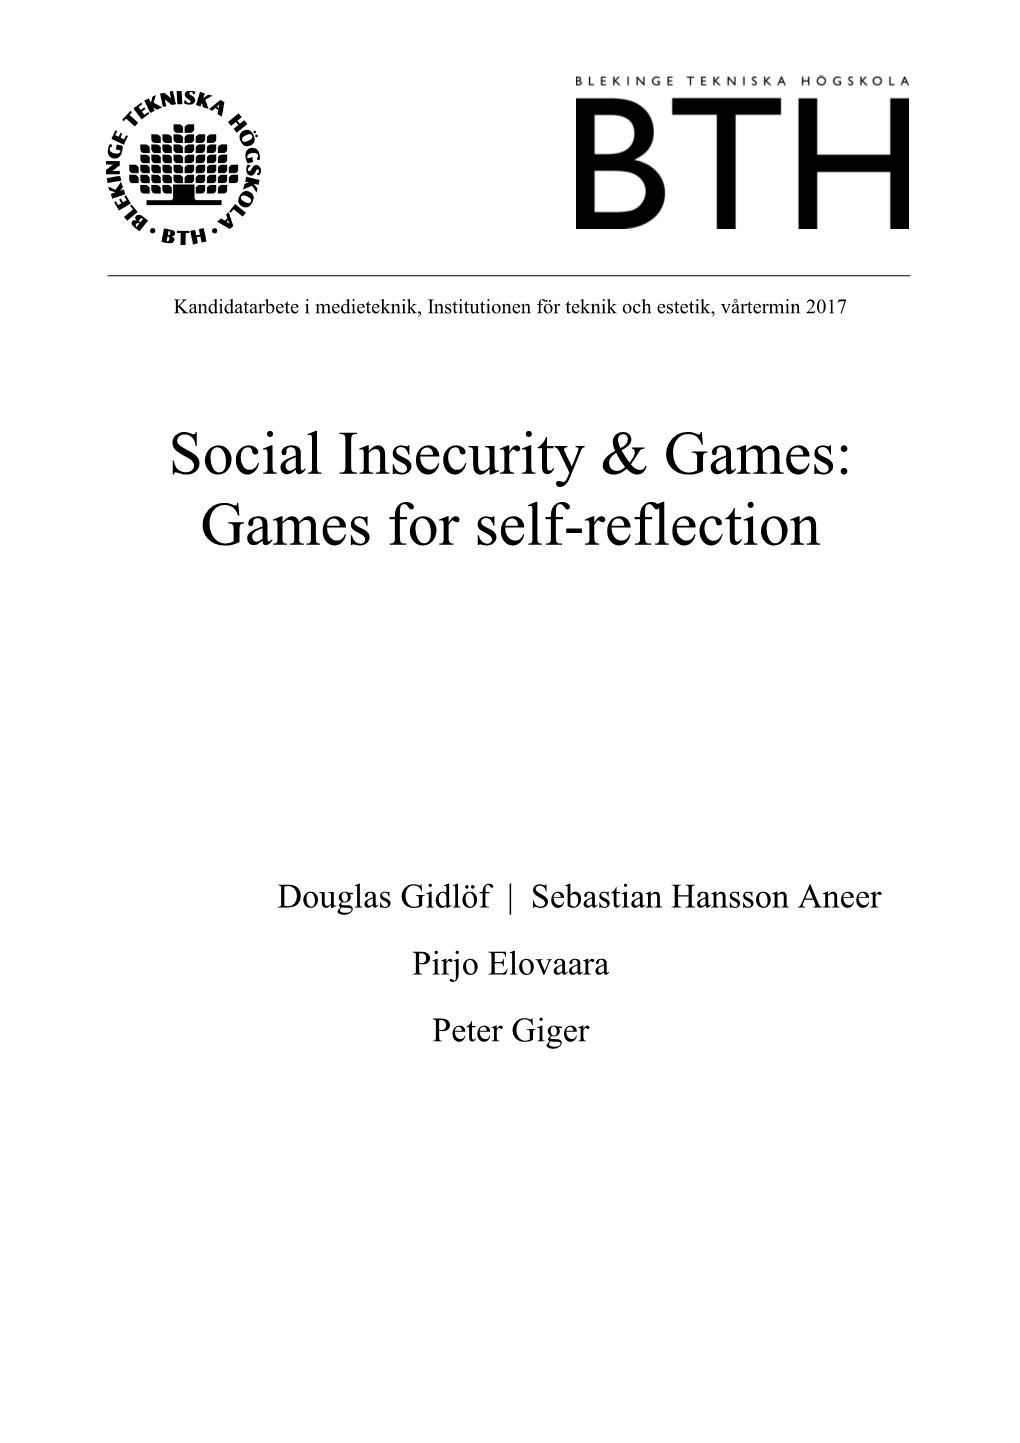 Games for Self-Reflection